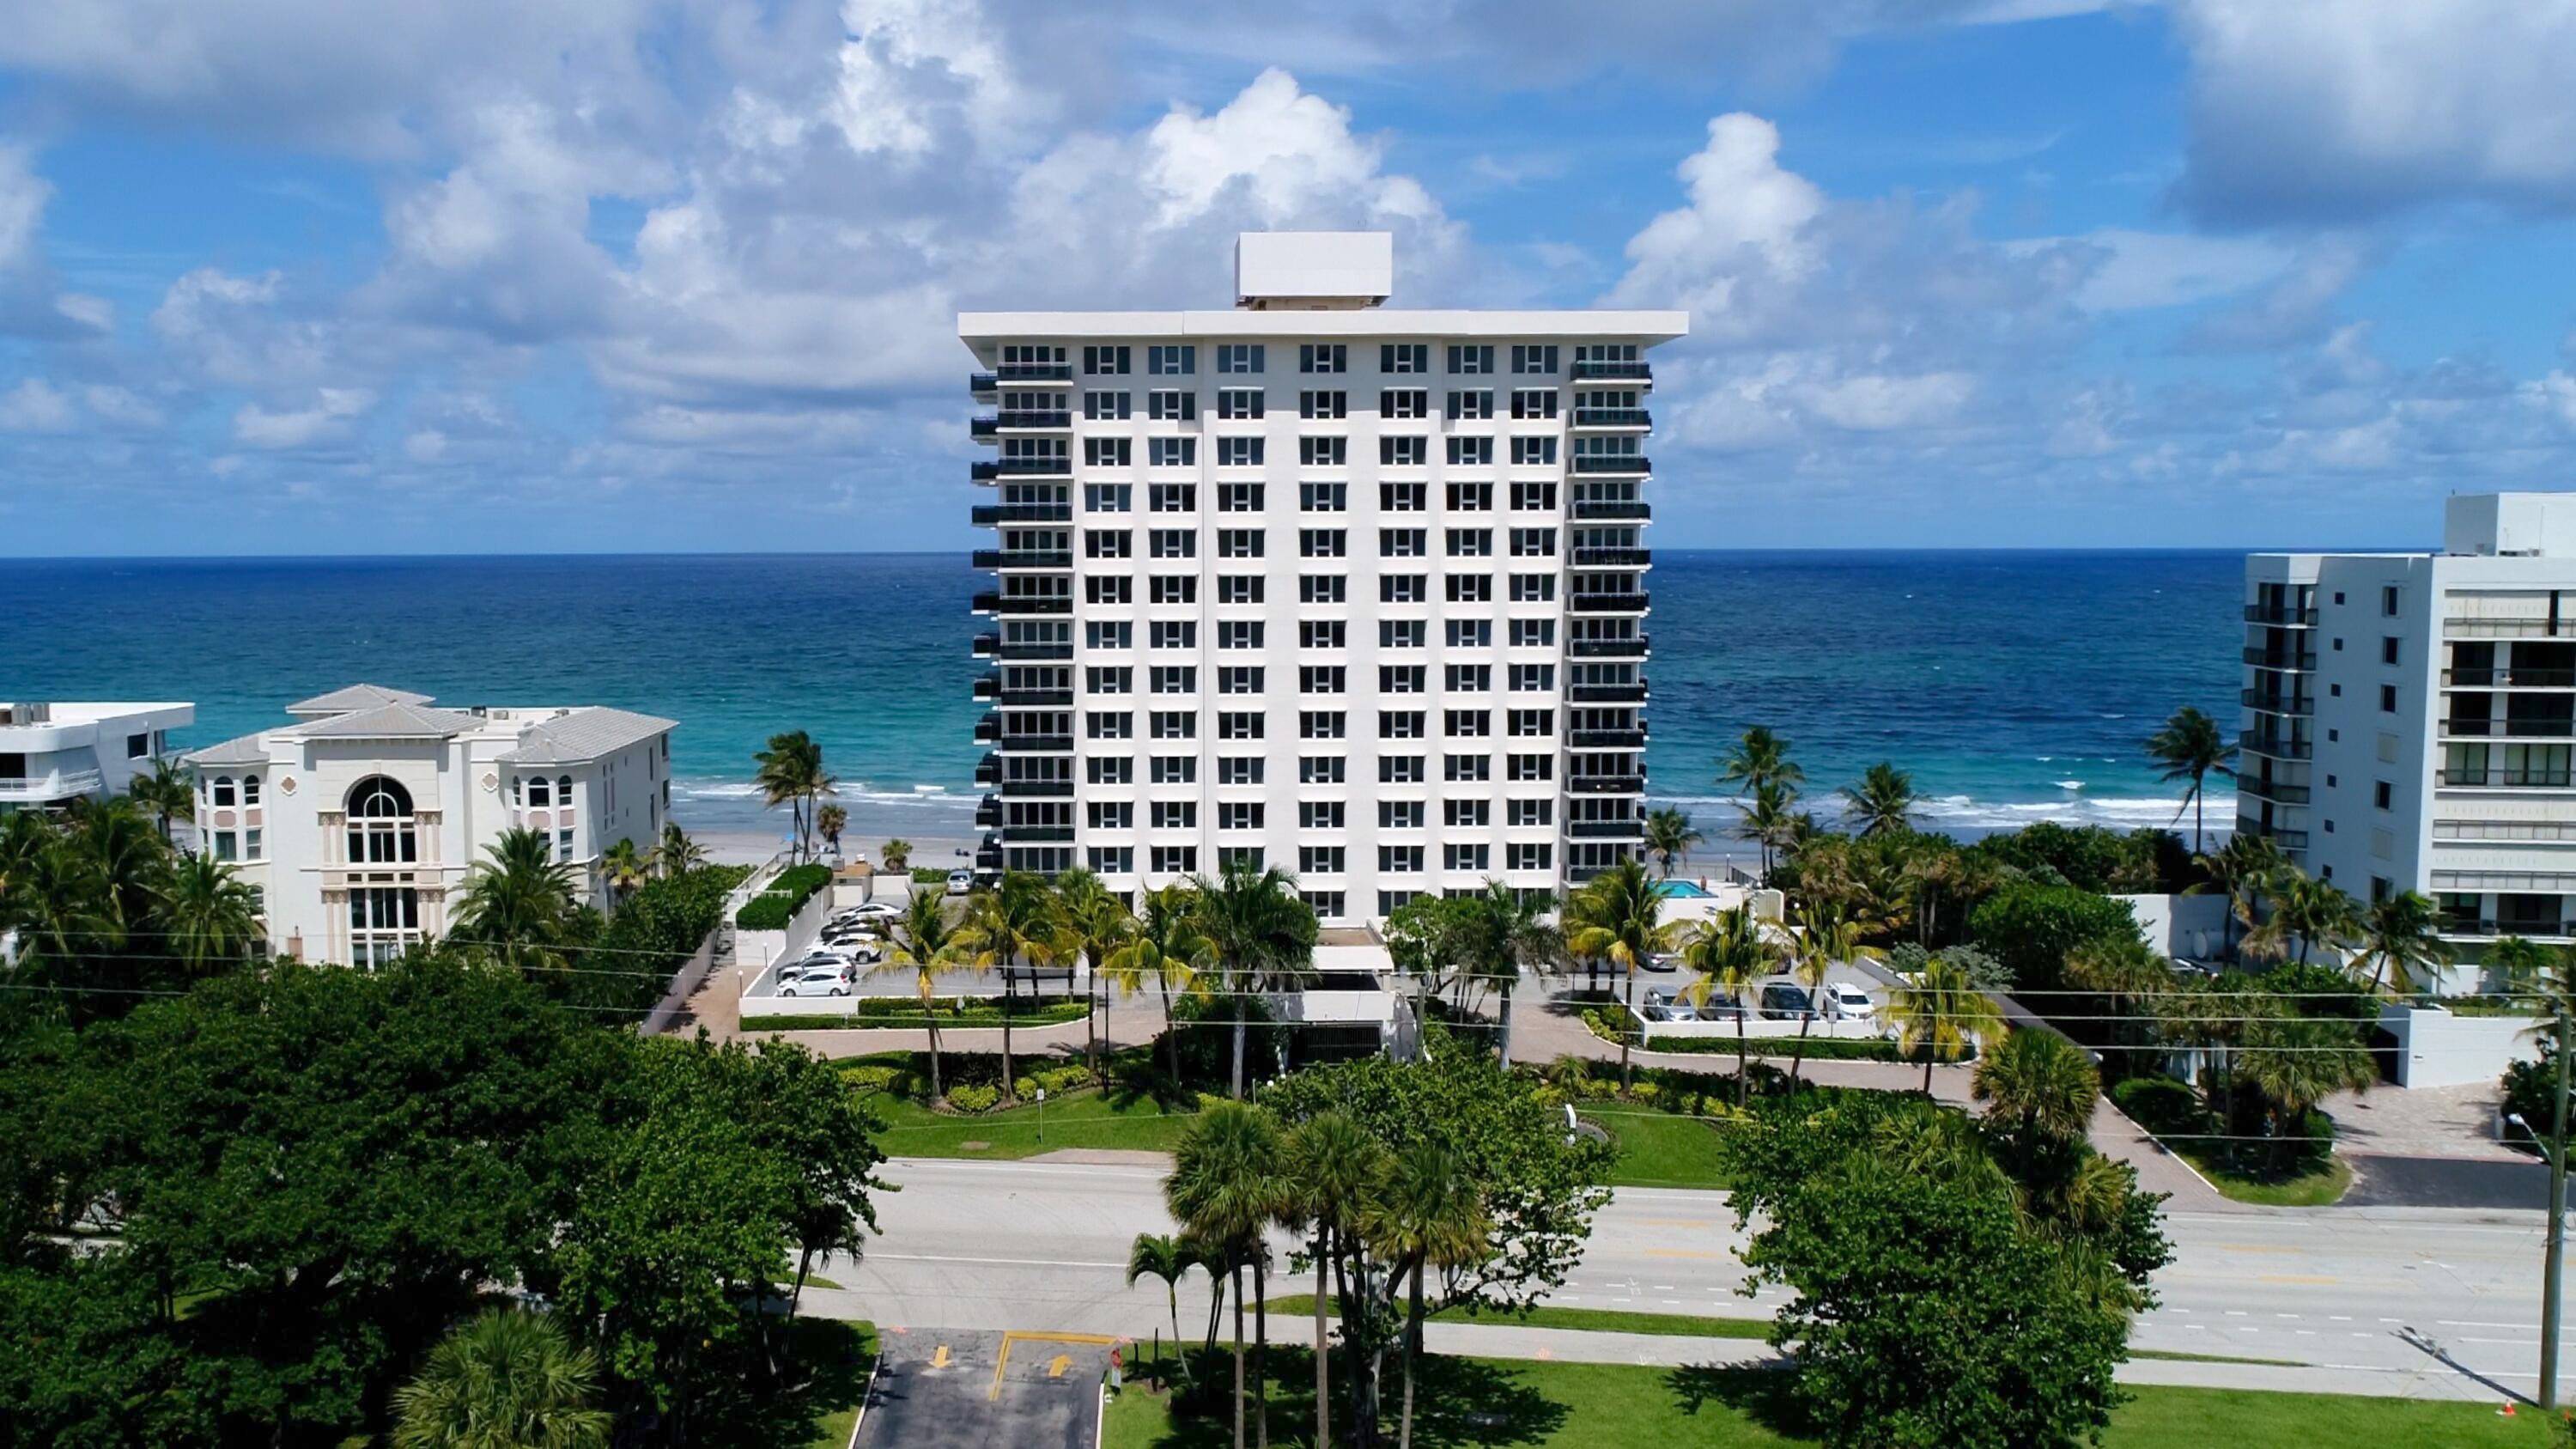 Offering contemporary ambience, the ultimate in luxury, and a perfect location surrounded by Boca Raton's bountiful natural beauty of sand and sea, the recently renovated Ocean Reef Towers offers a ...